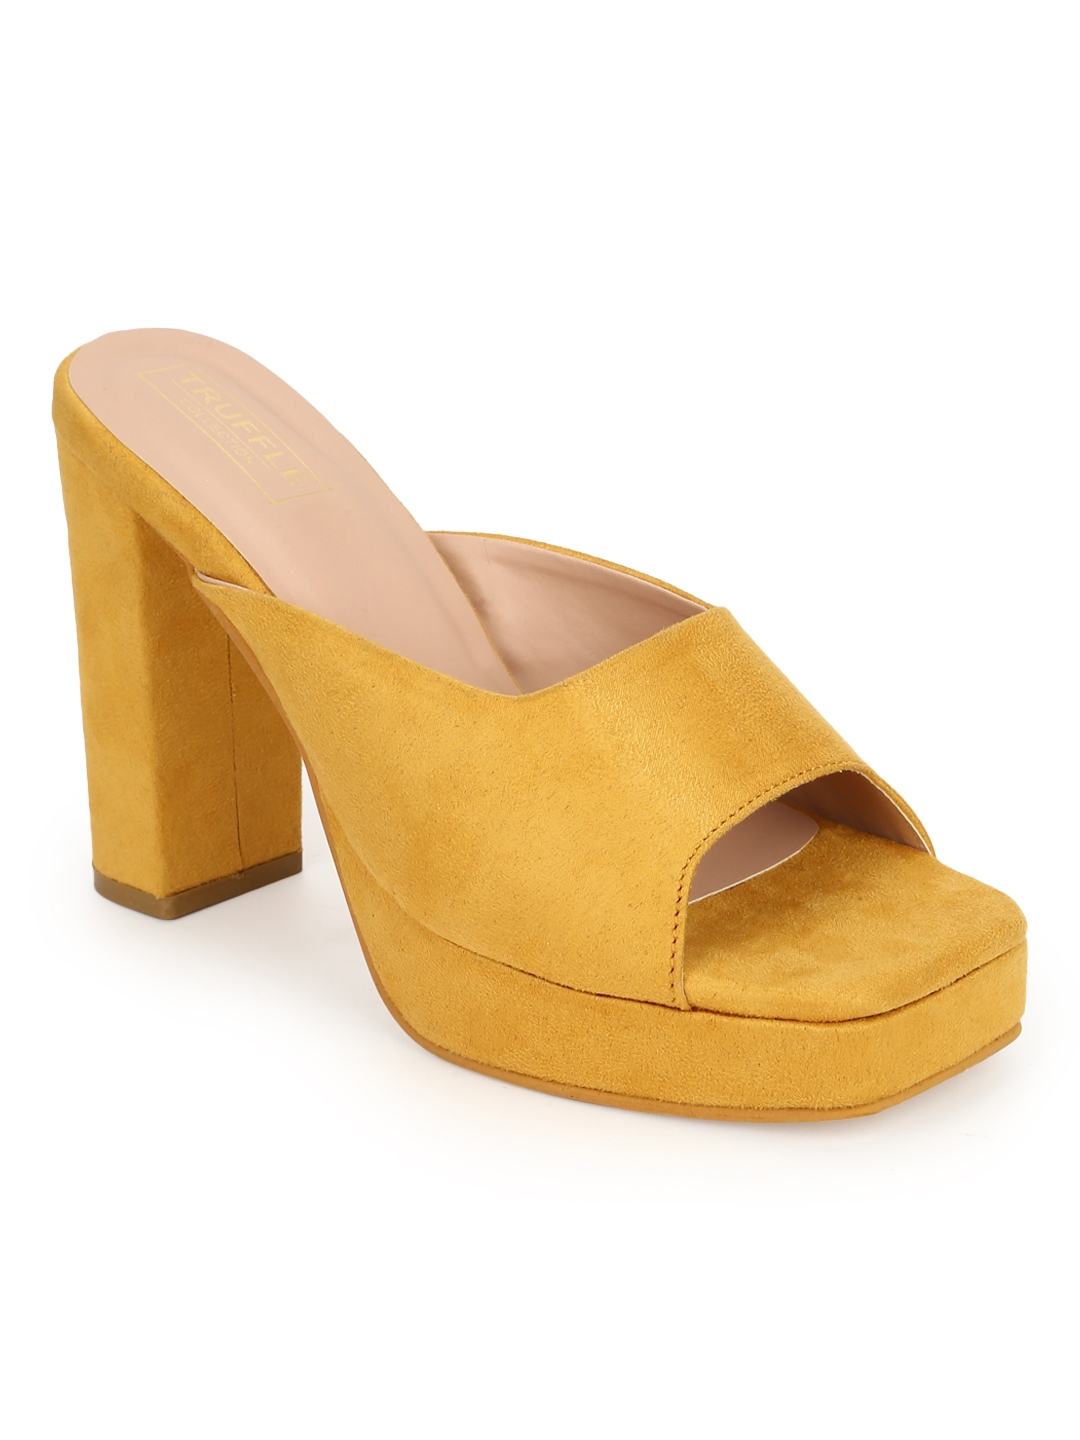 Truffle Collection | Mustard Yellow Suede High Block Heel Mules